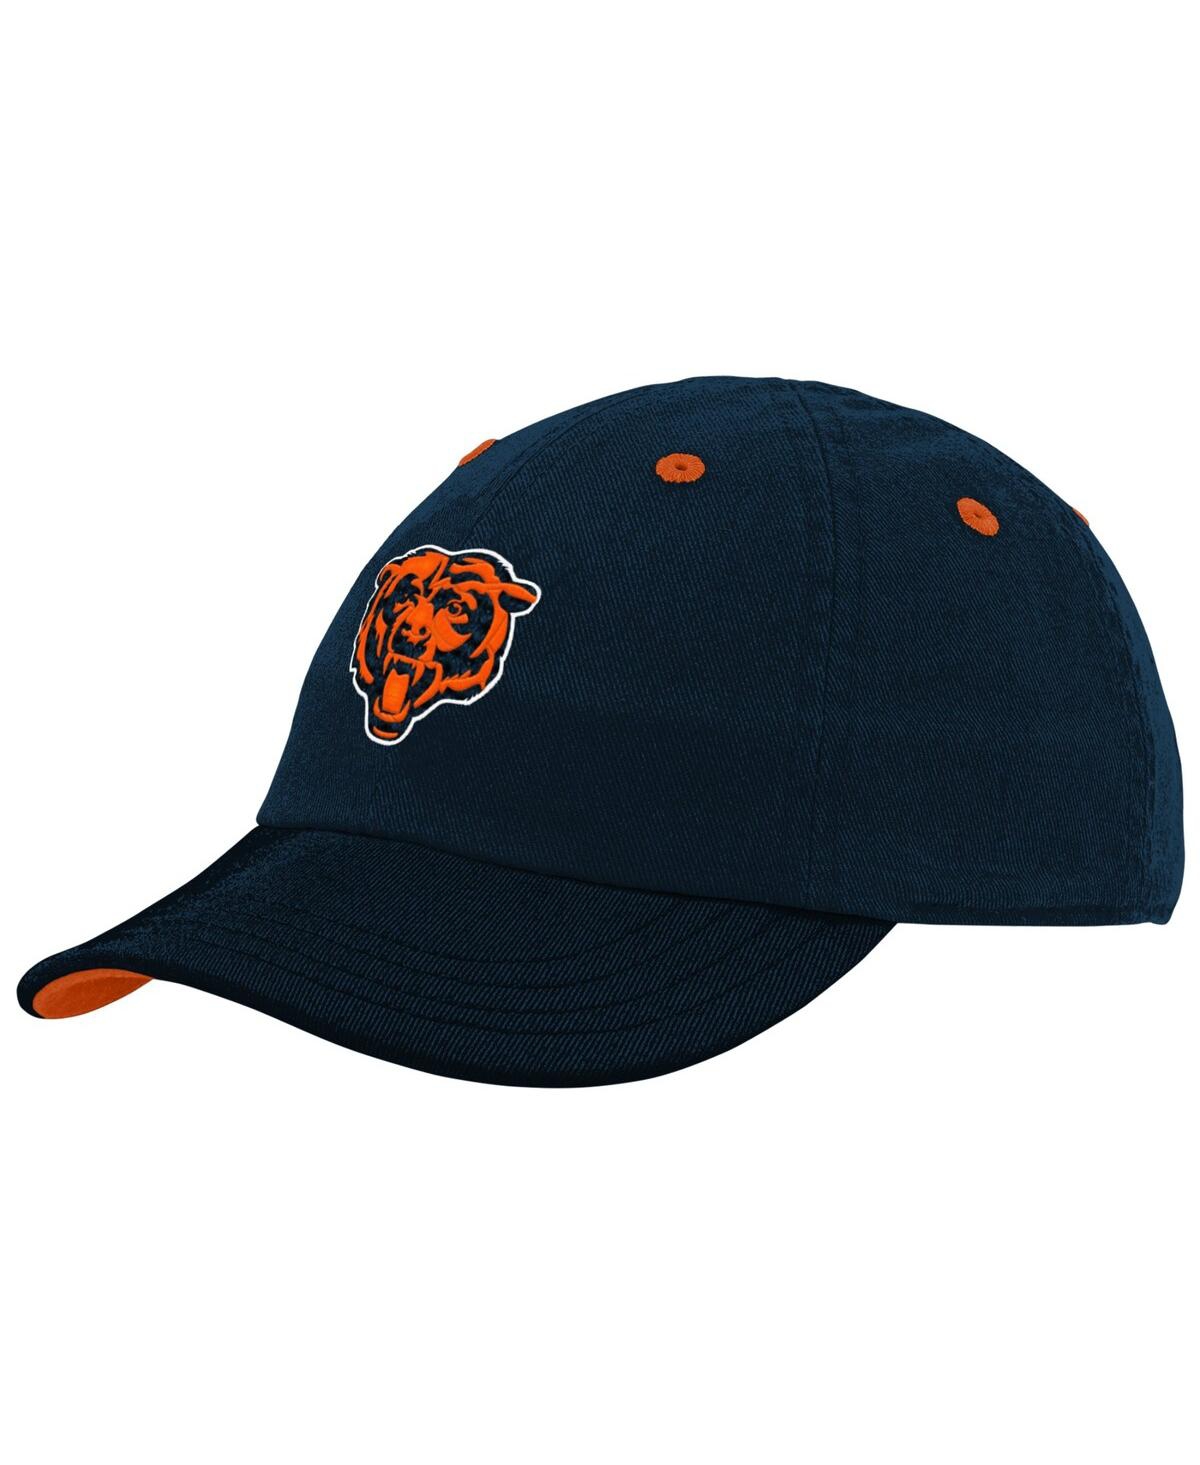 Shop Outerstuff Infant Boys And Girls Navy Chicago Bears Team Slouch Flex Hat